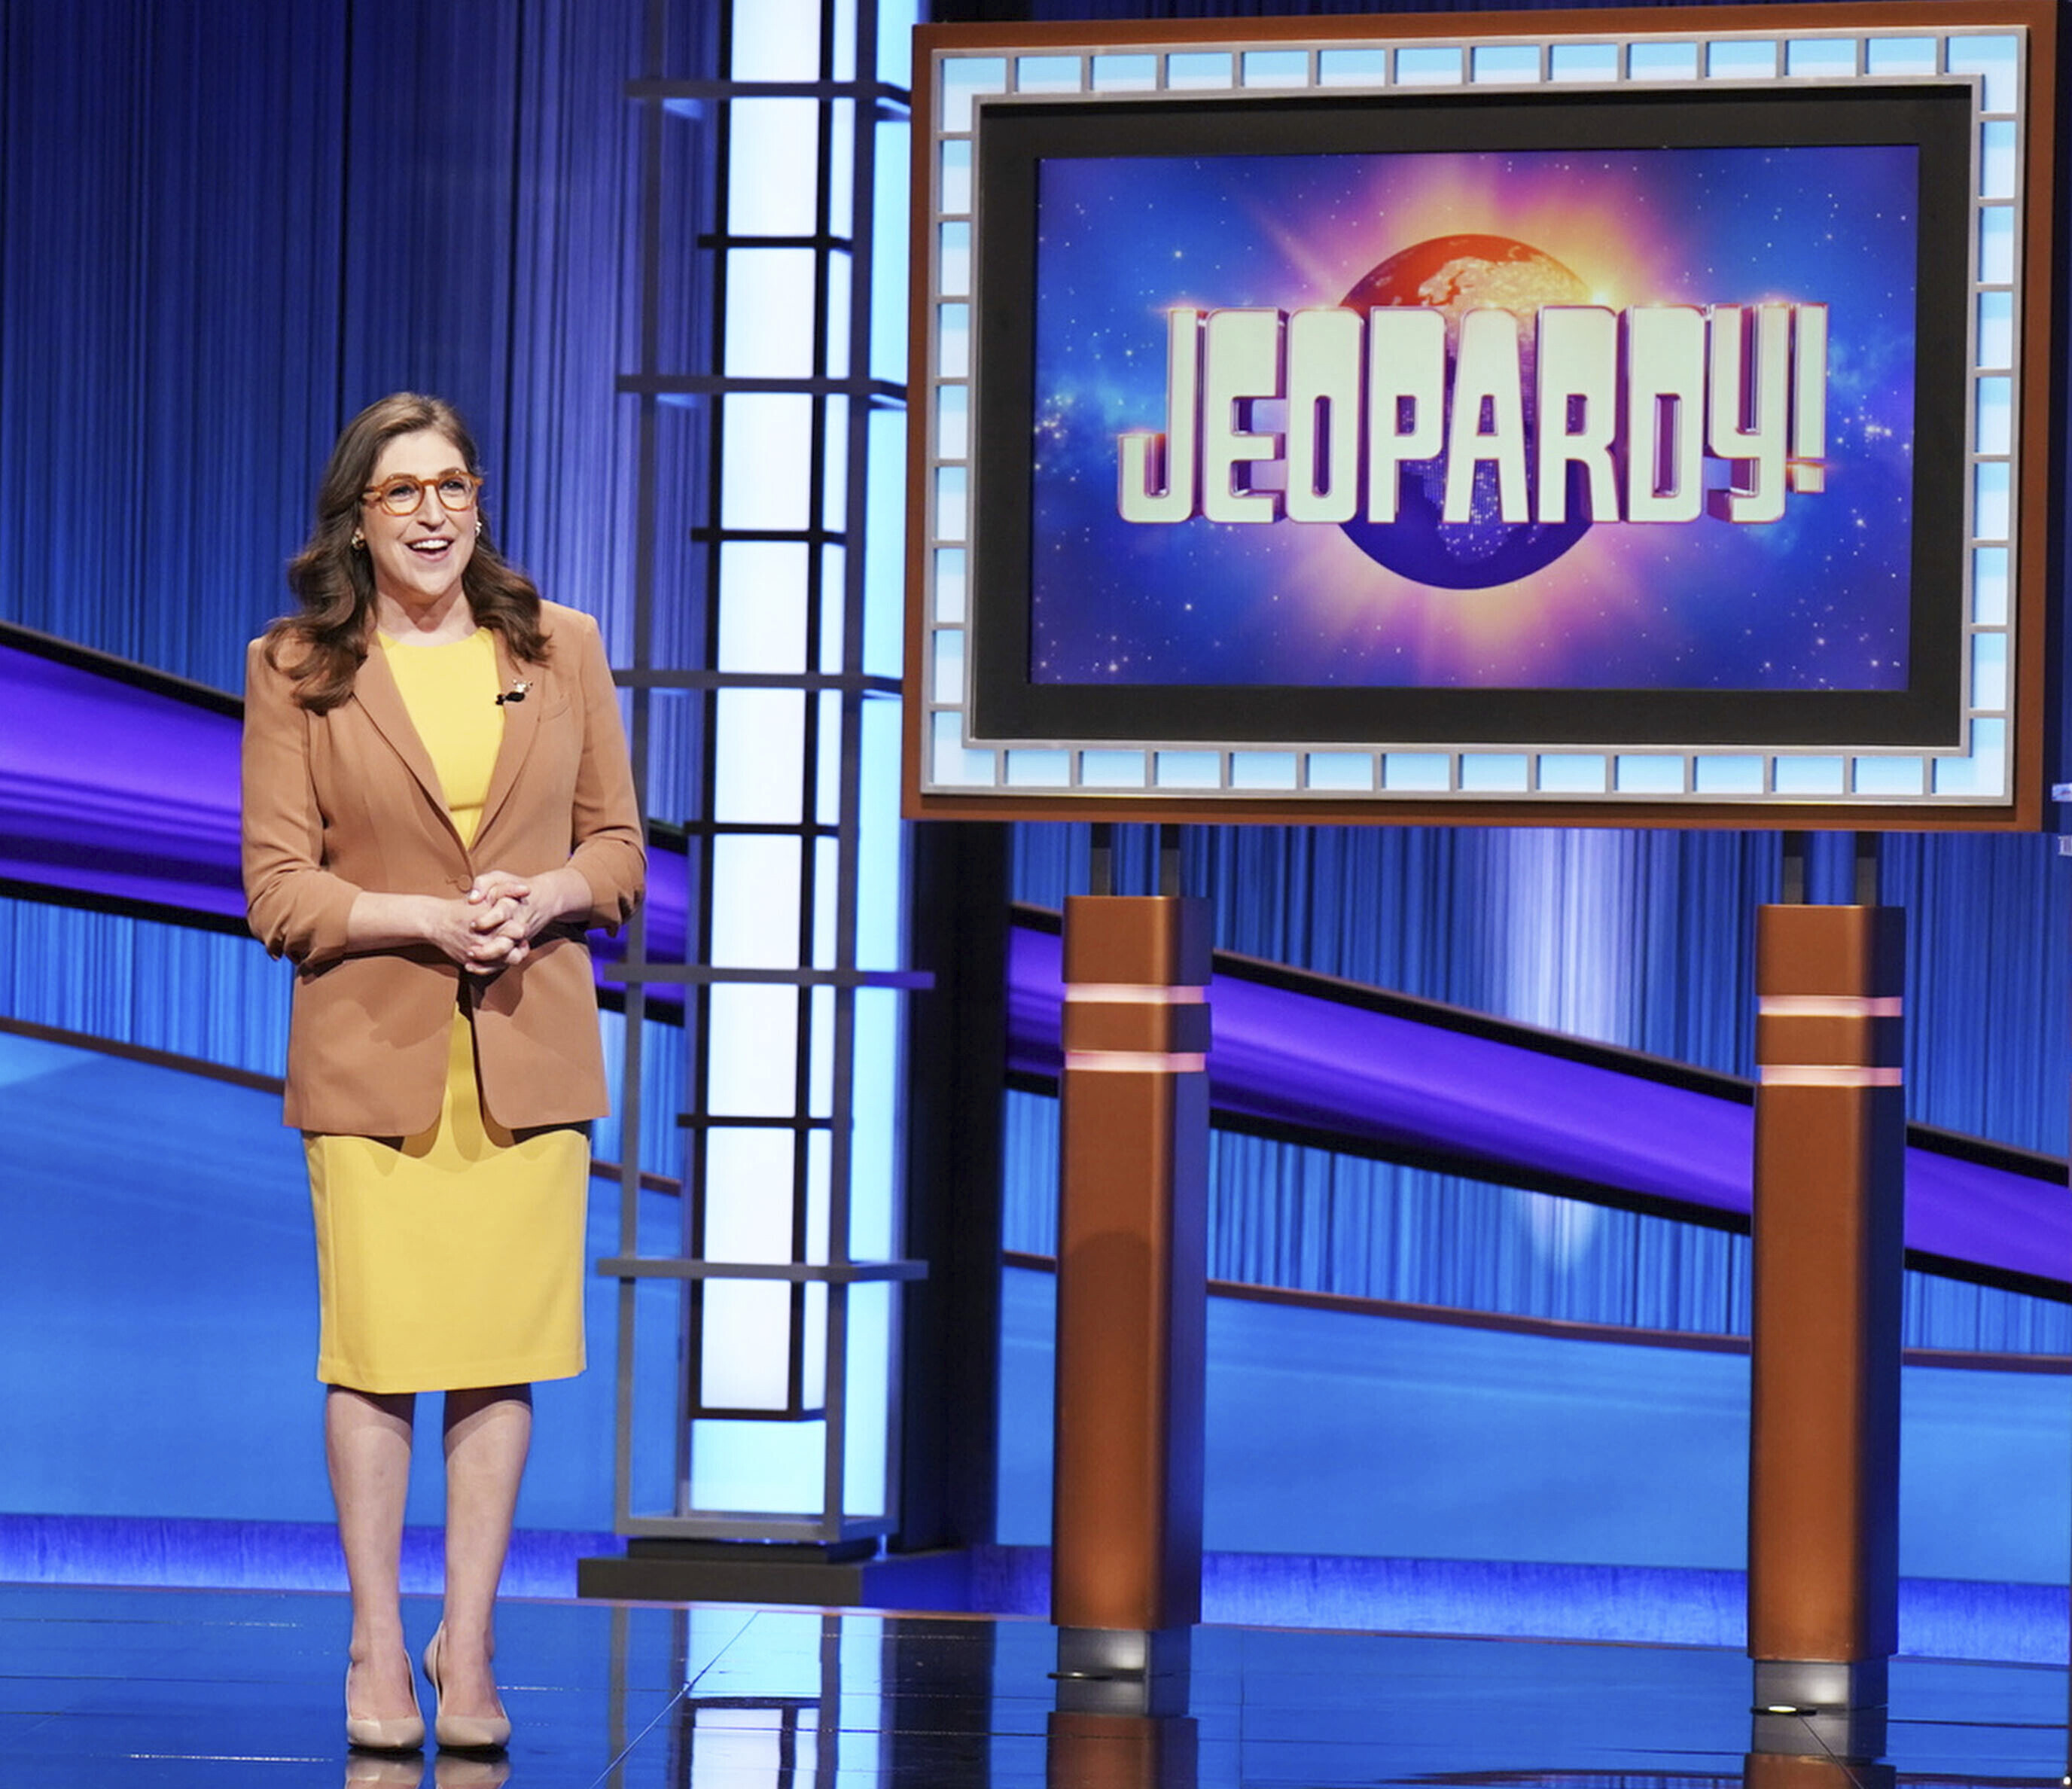 She also stopped posting about Jeopardy! amid a long hiatus